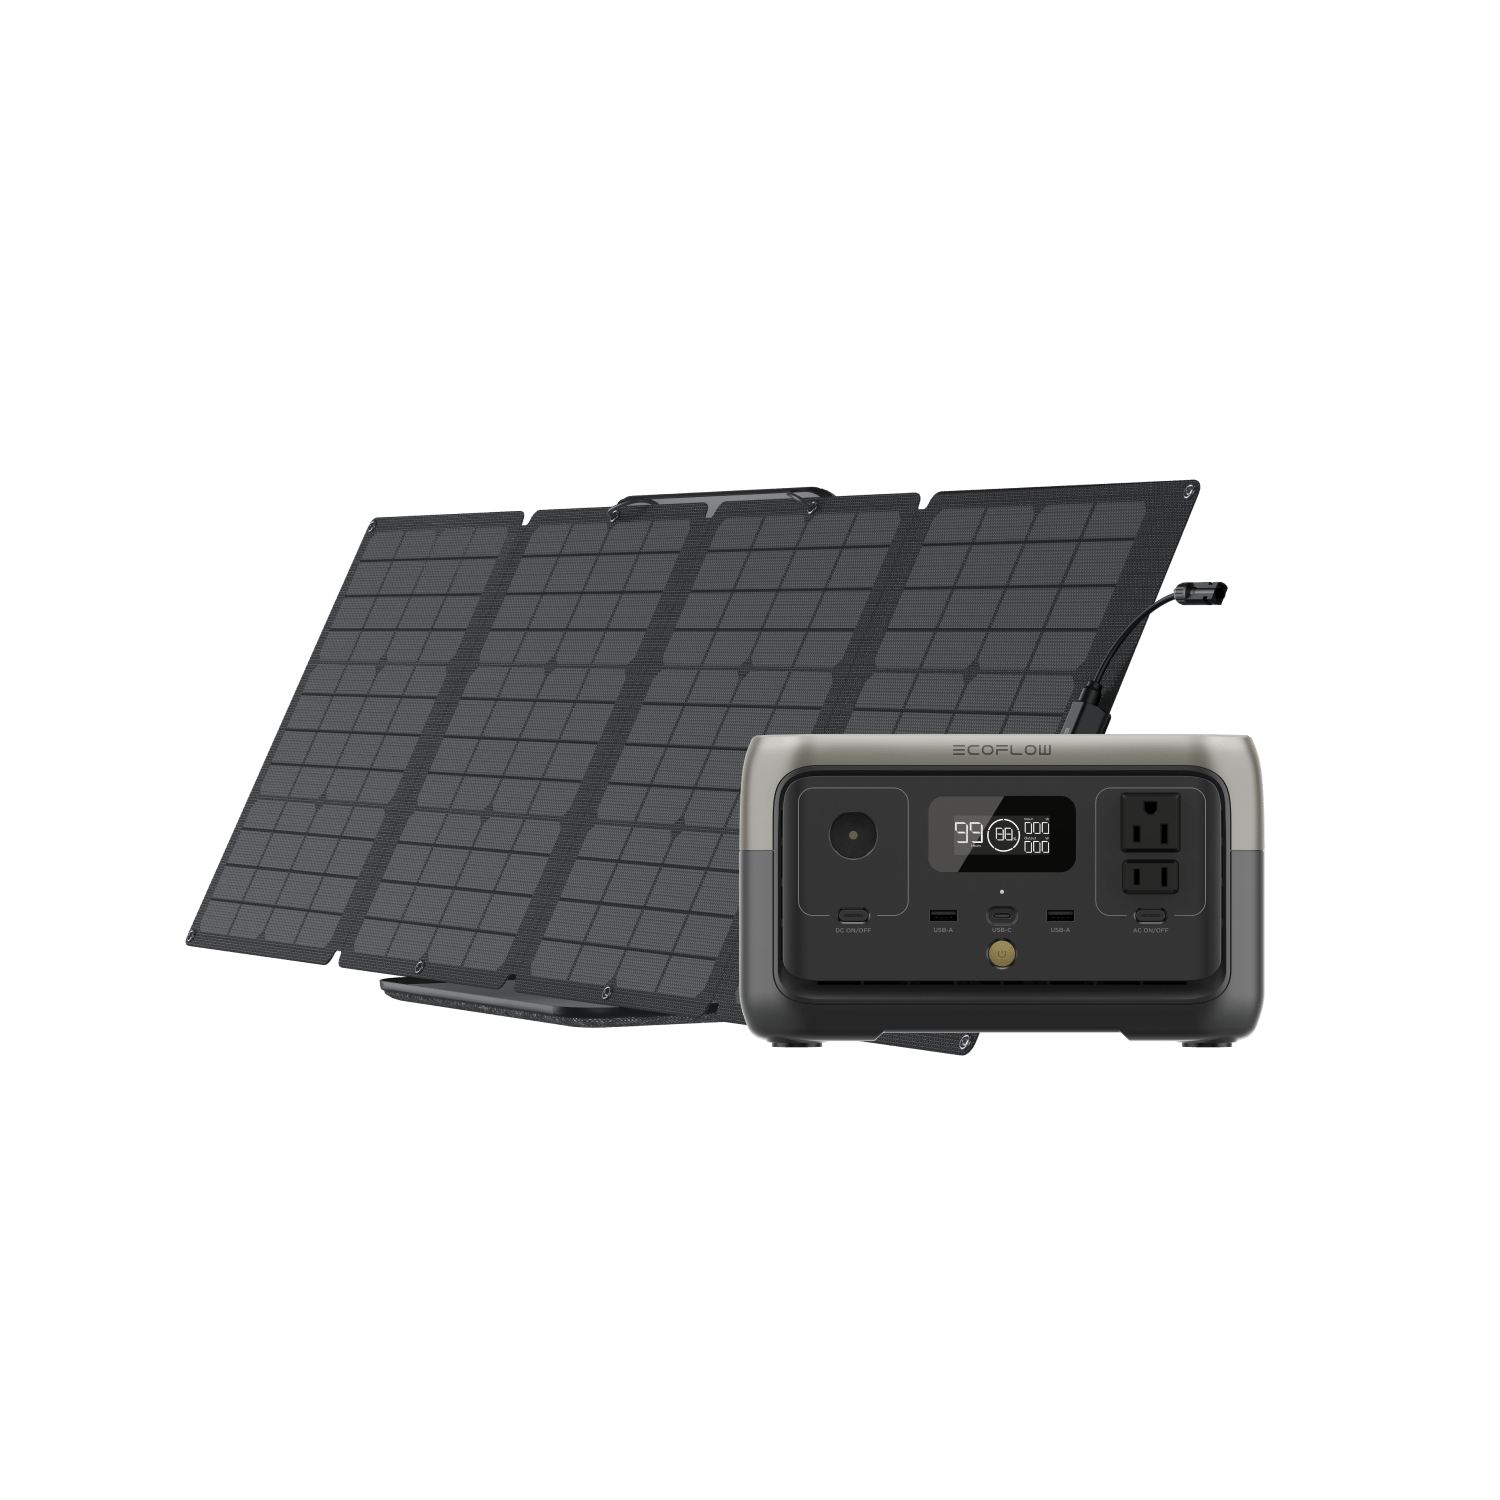  EF ECOFLOW Portable Power Station RIVER 2, 256Wh LiFePO4  Battery/ 1 Hour Fast Charging, 2 Up to 600W AC Outlets, Solar Generator  (Solar Panel Optional) for Outdoor Camping/RVs/Home Use 